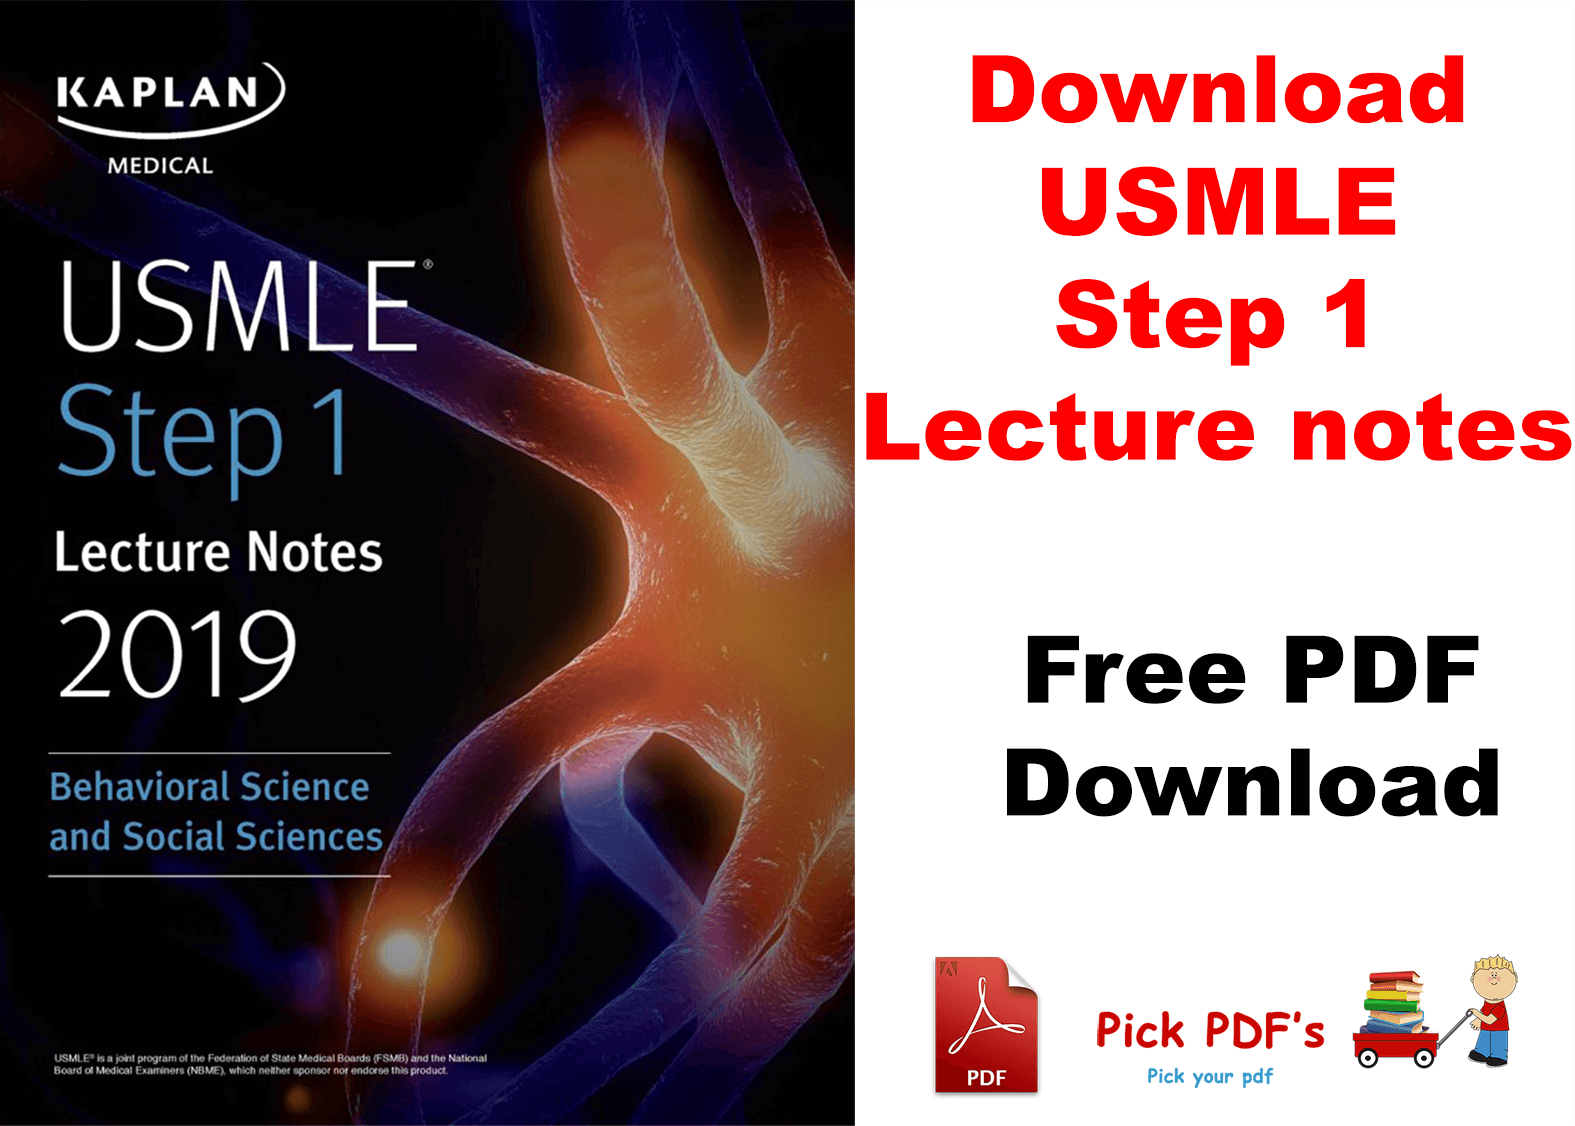 https://pickpdfs.com/free-download-usmle-step-1-lecture-notes-2019-behavioral-science-and-social-sciences-pdf/